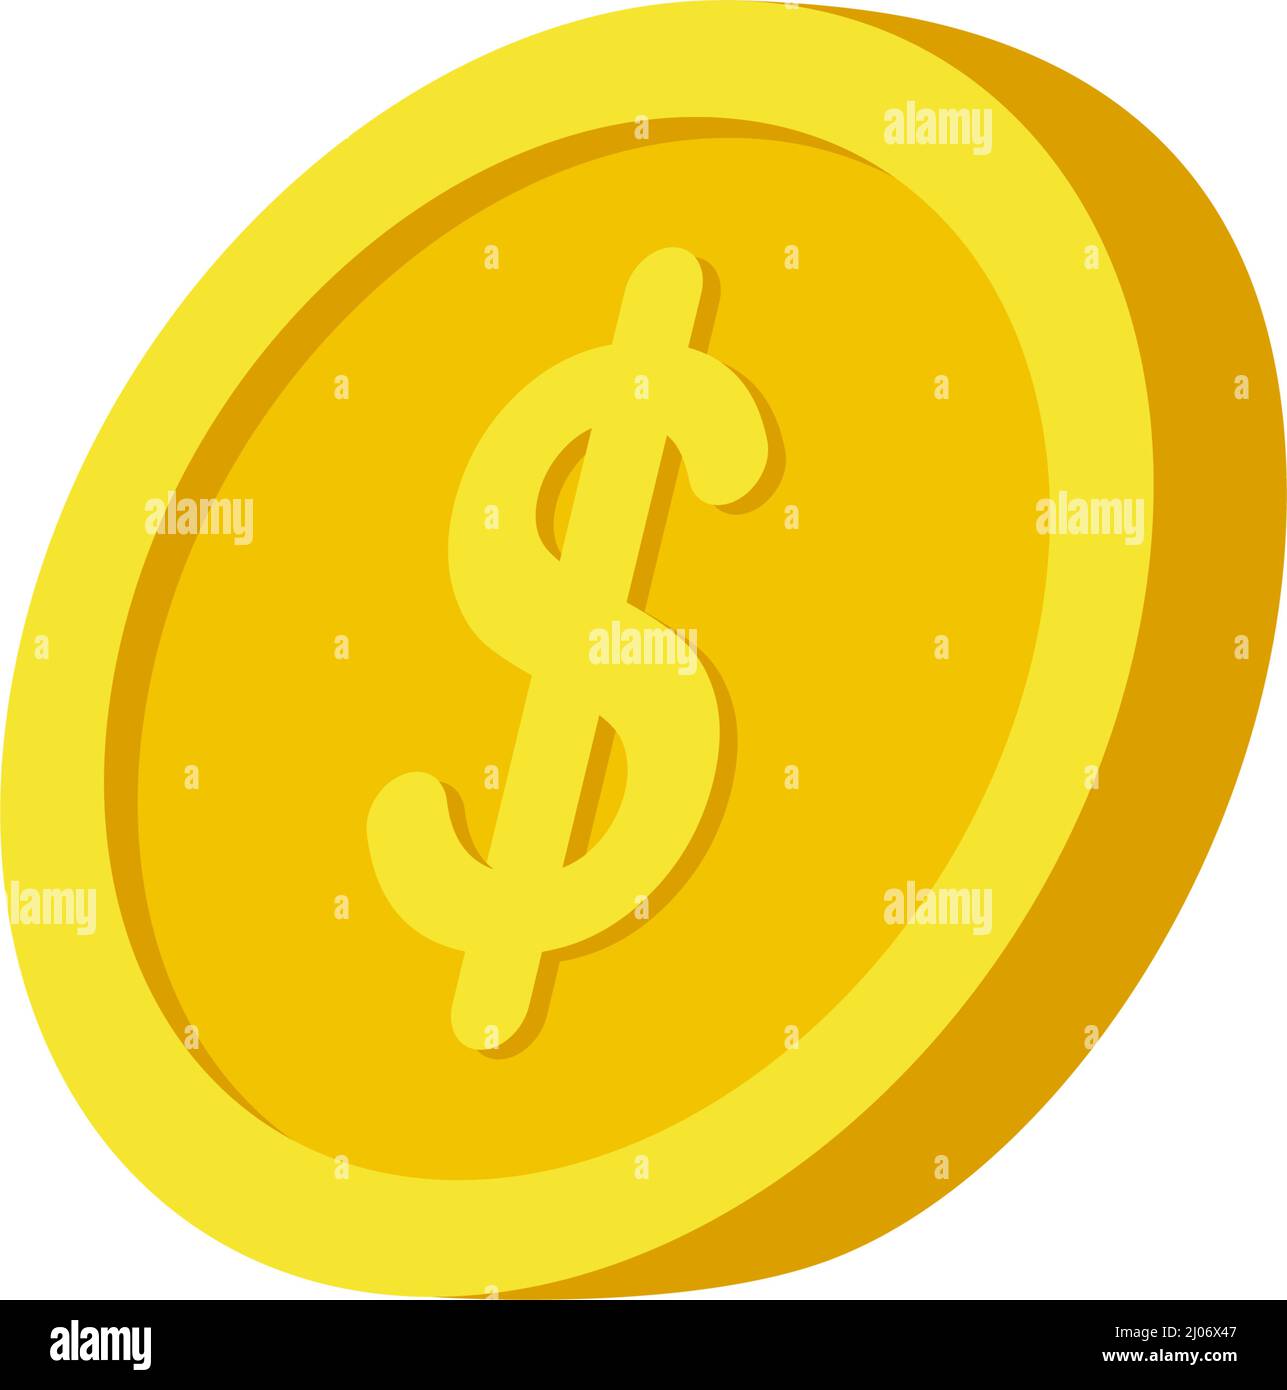 Dollar coin icon design template vector isolated illustration Stock Vector